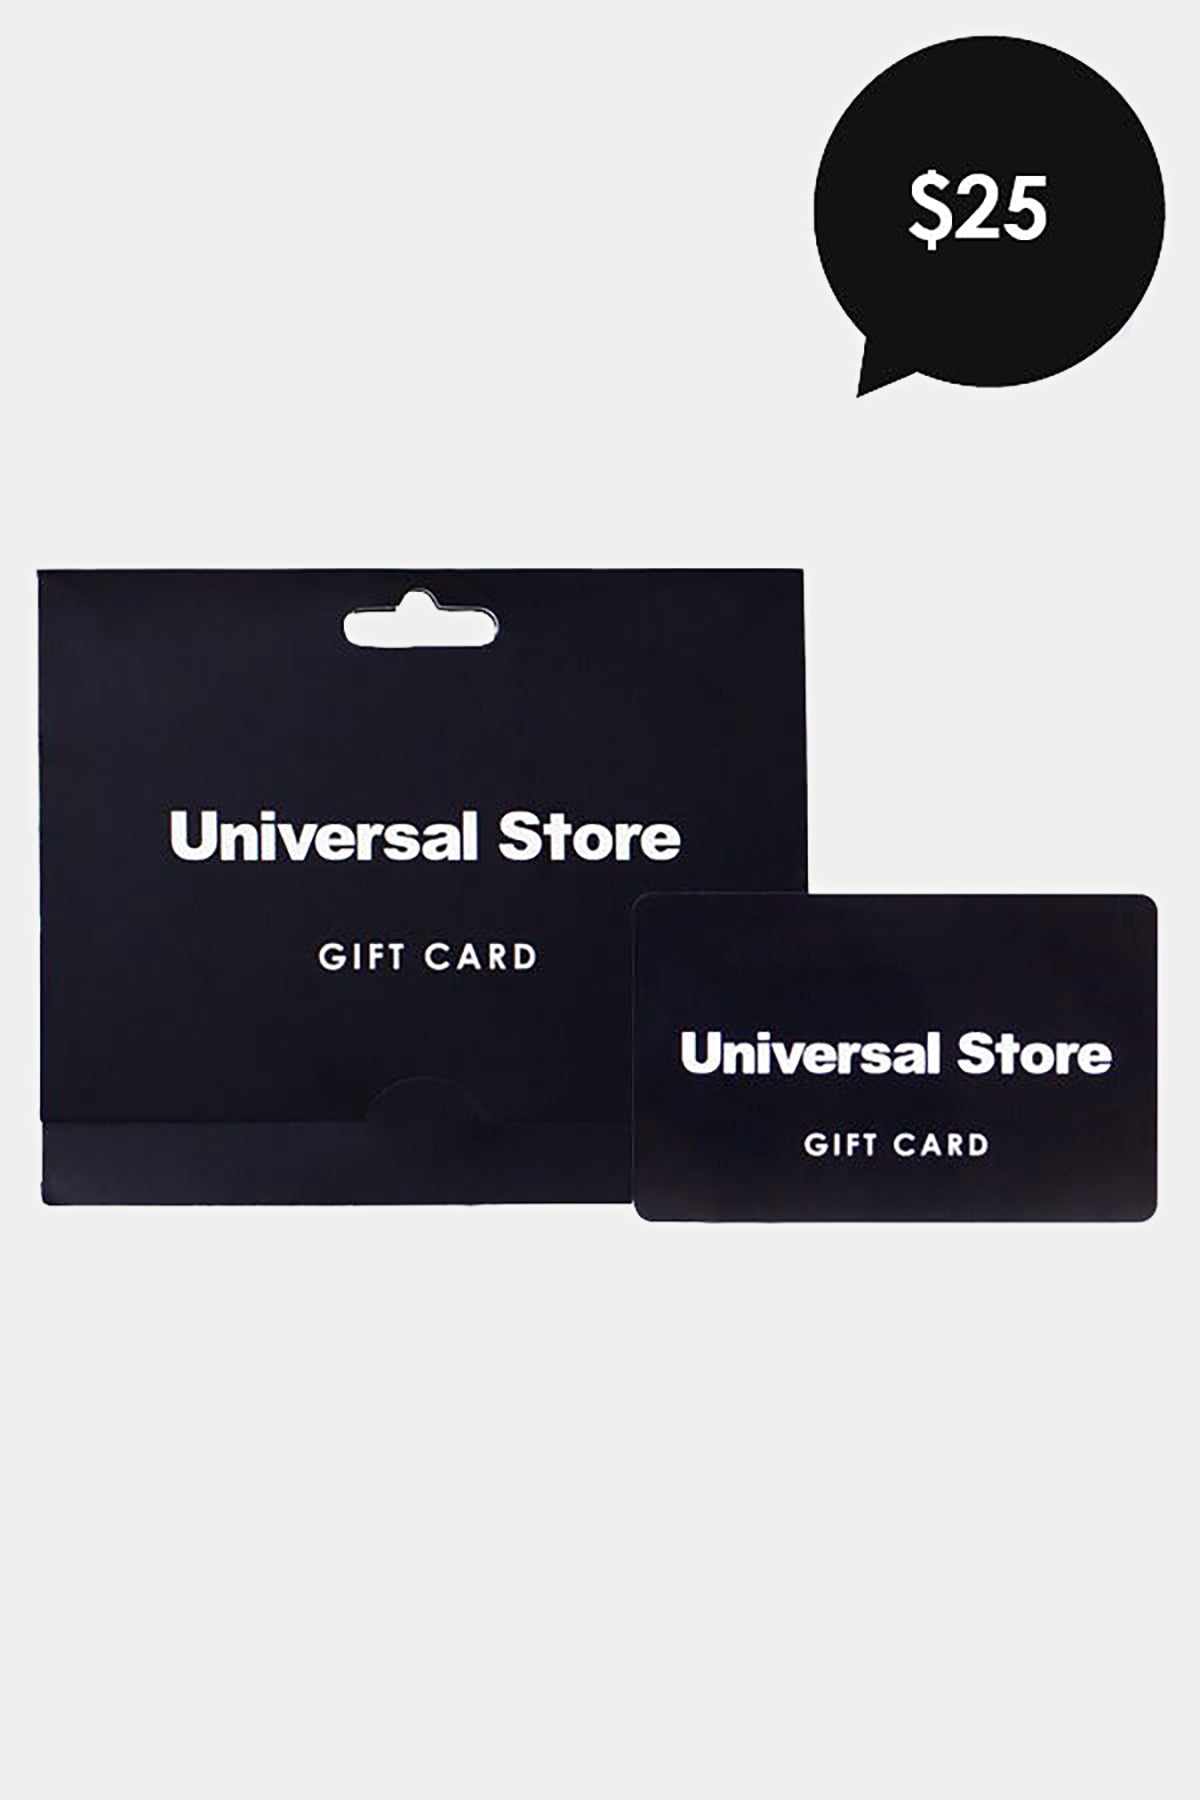 Universal Store $25 Gift Card